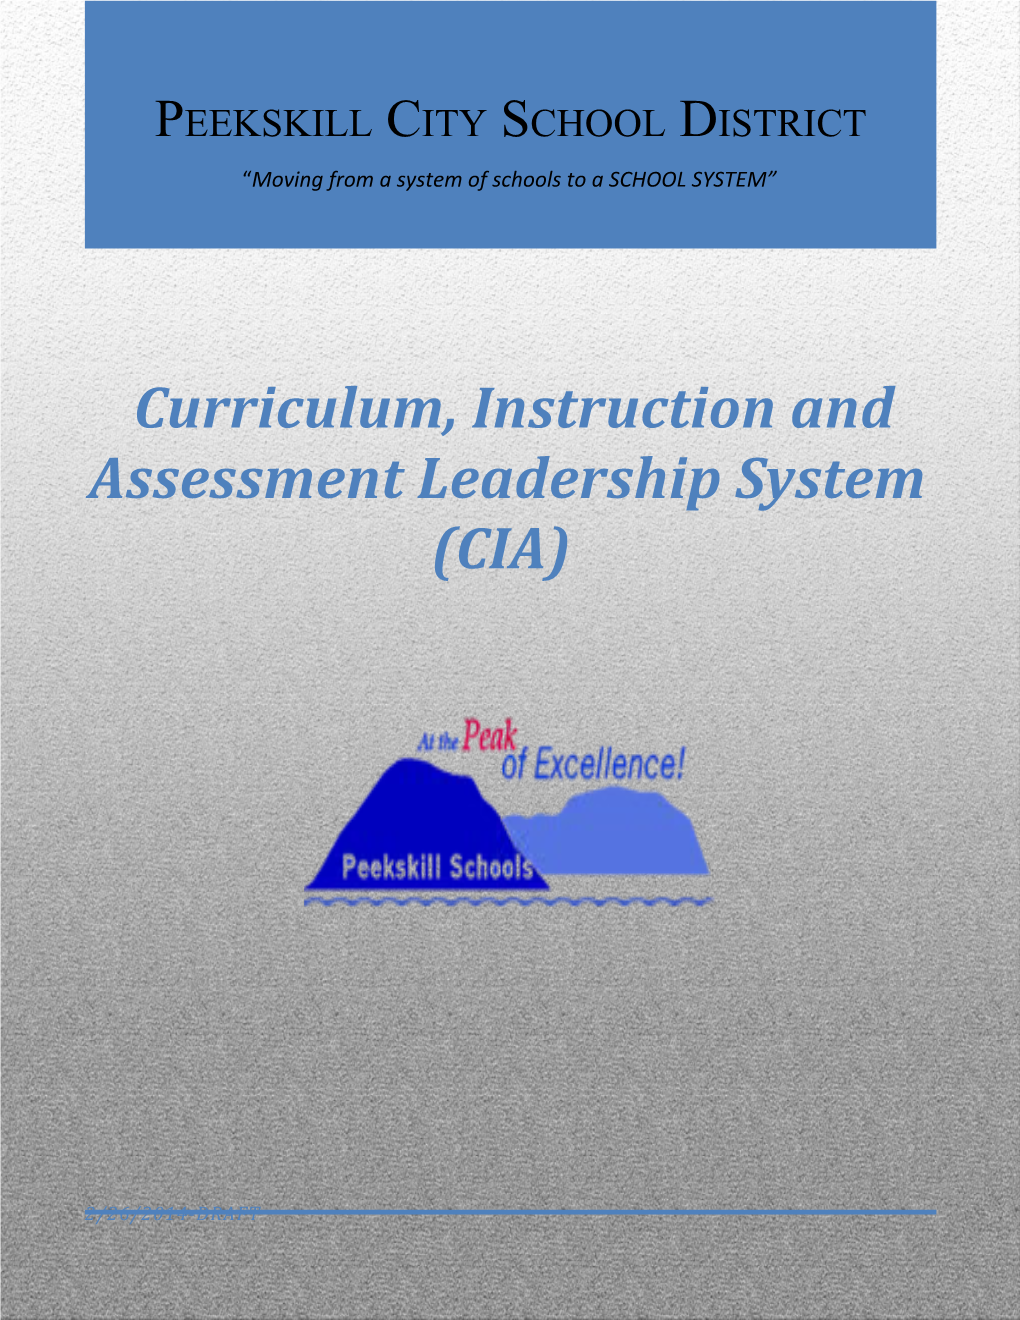 Curriculum, Instruction and Assessment Leadership System (CIA)